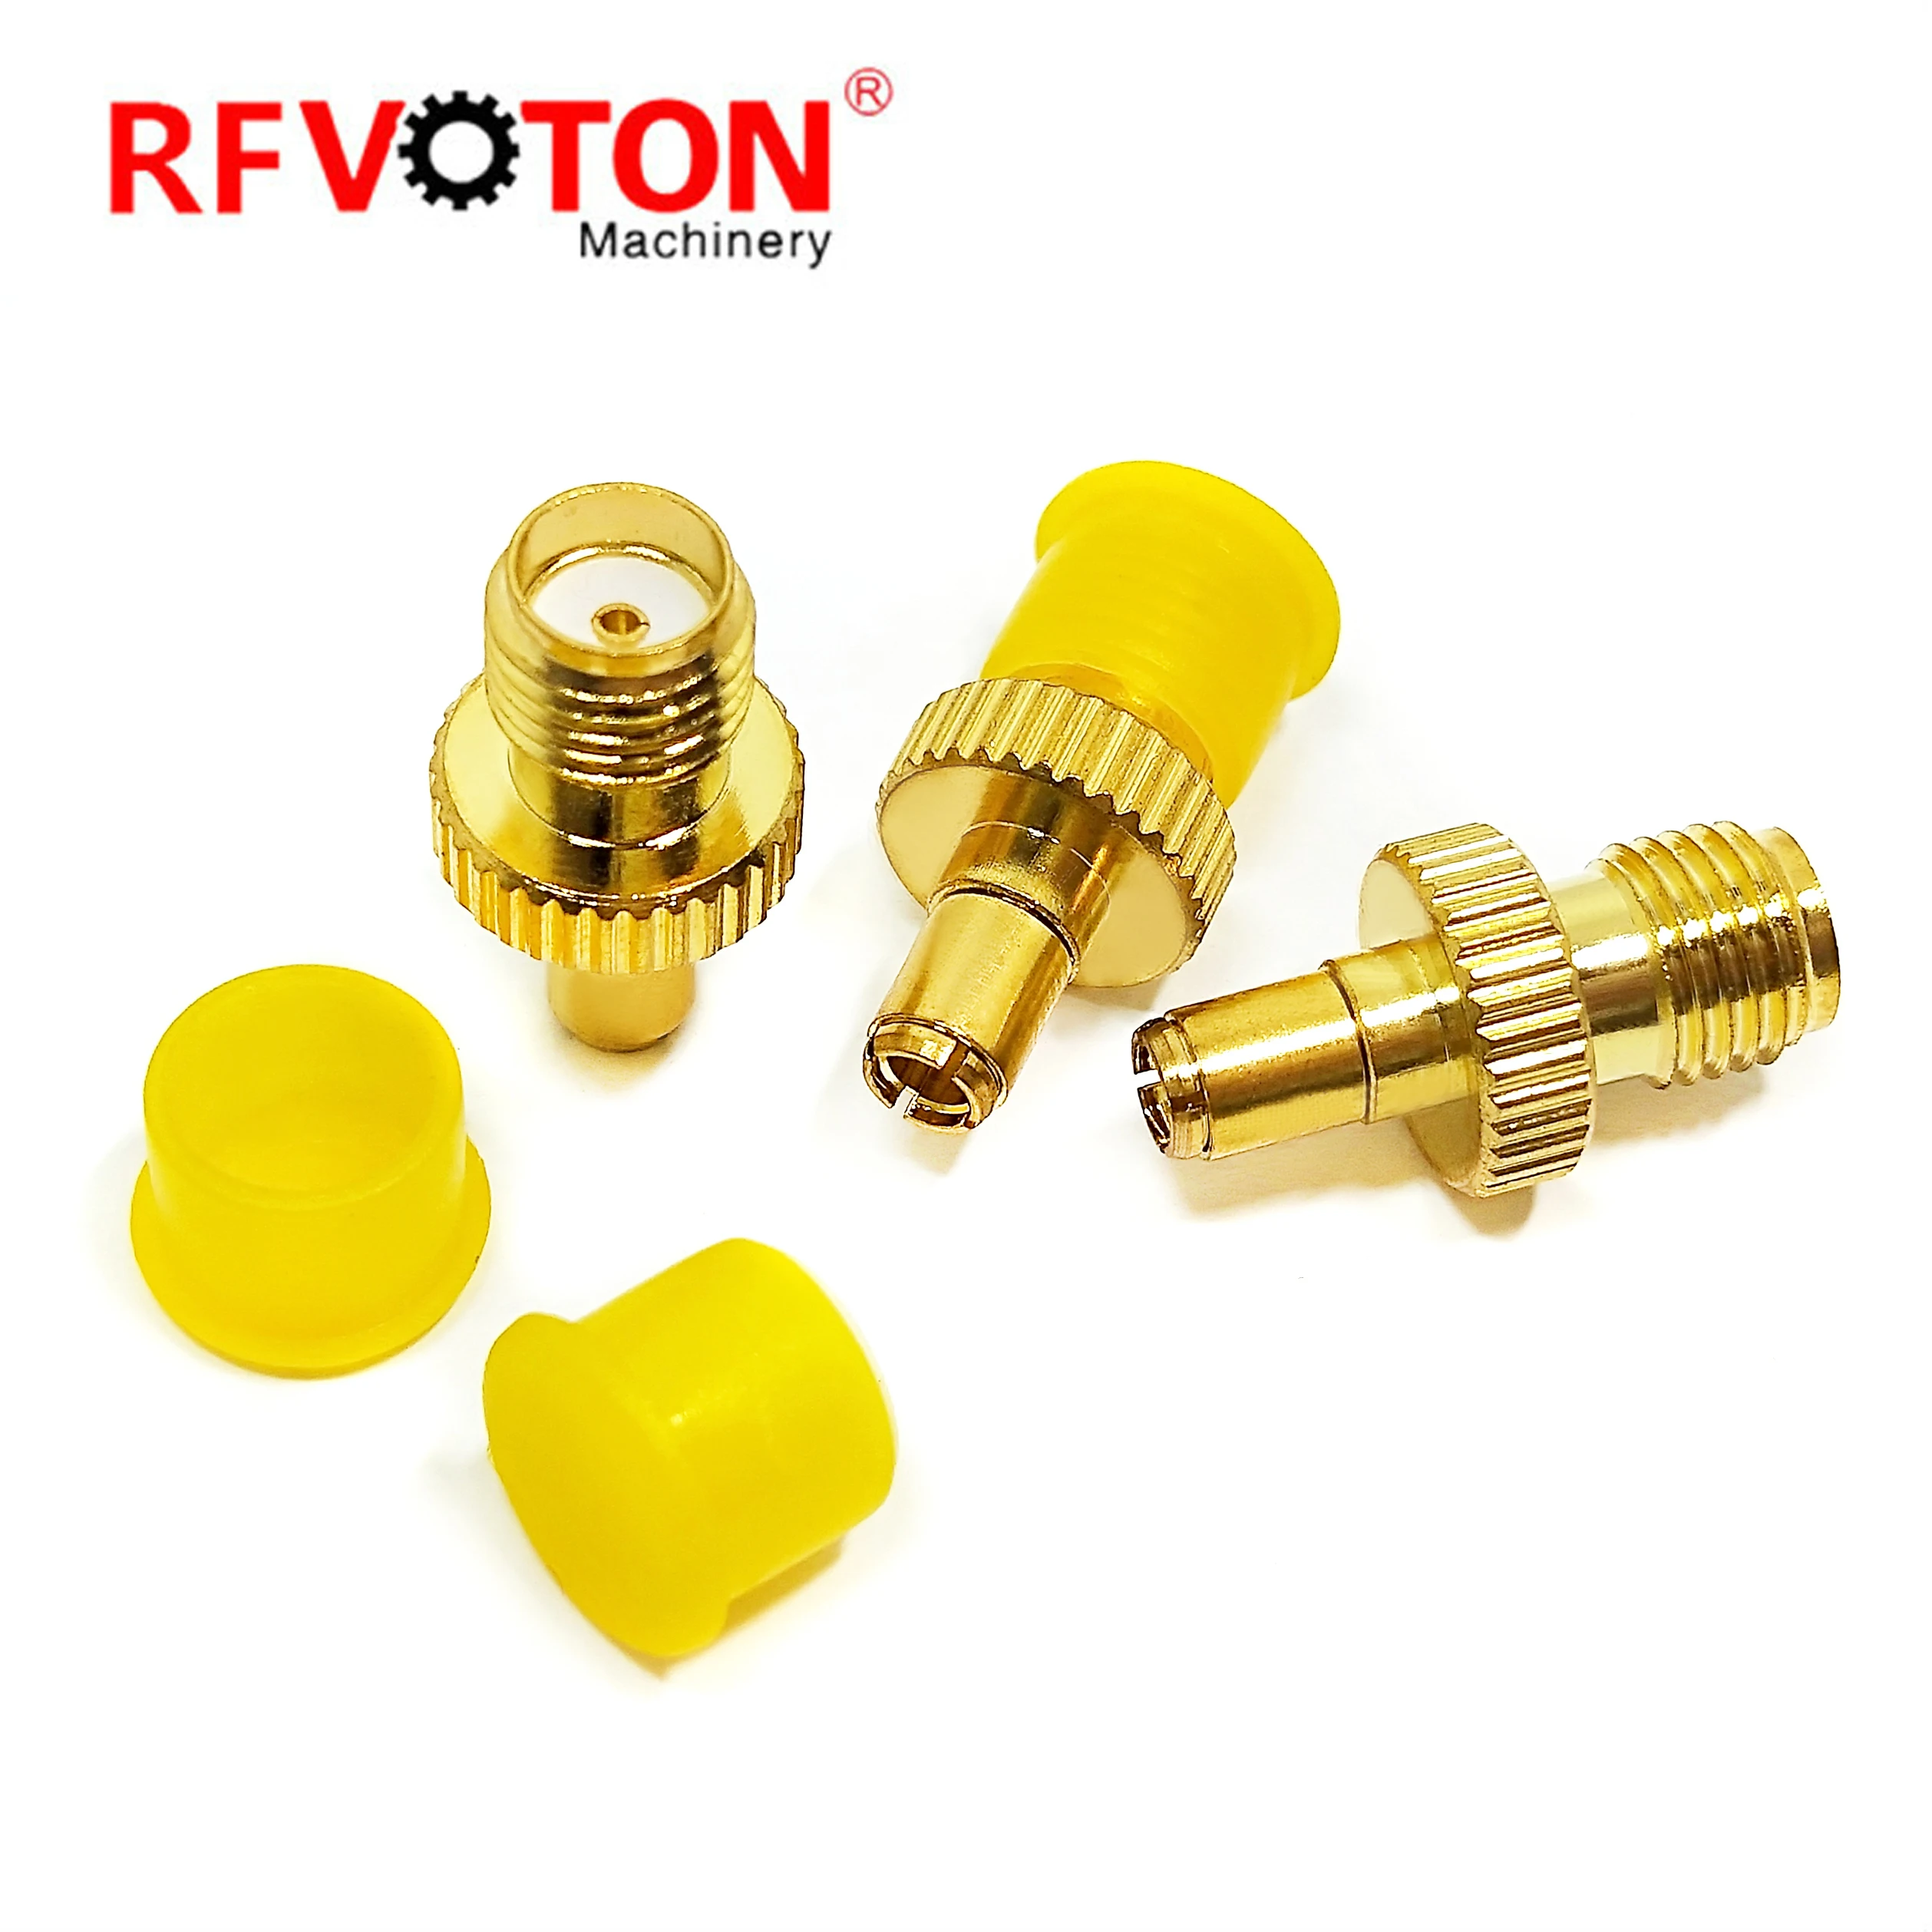 Factory directly Wholesale RF Adaptor SMA Female Jack To TS9 Male Plug RF Coax Coaxial Adapter RF Converter factory